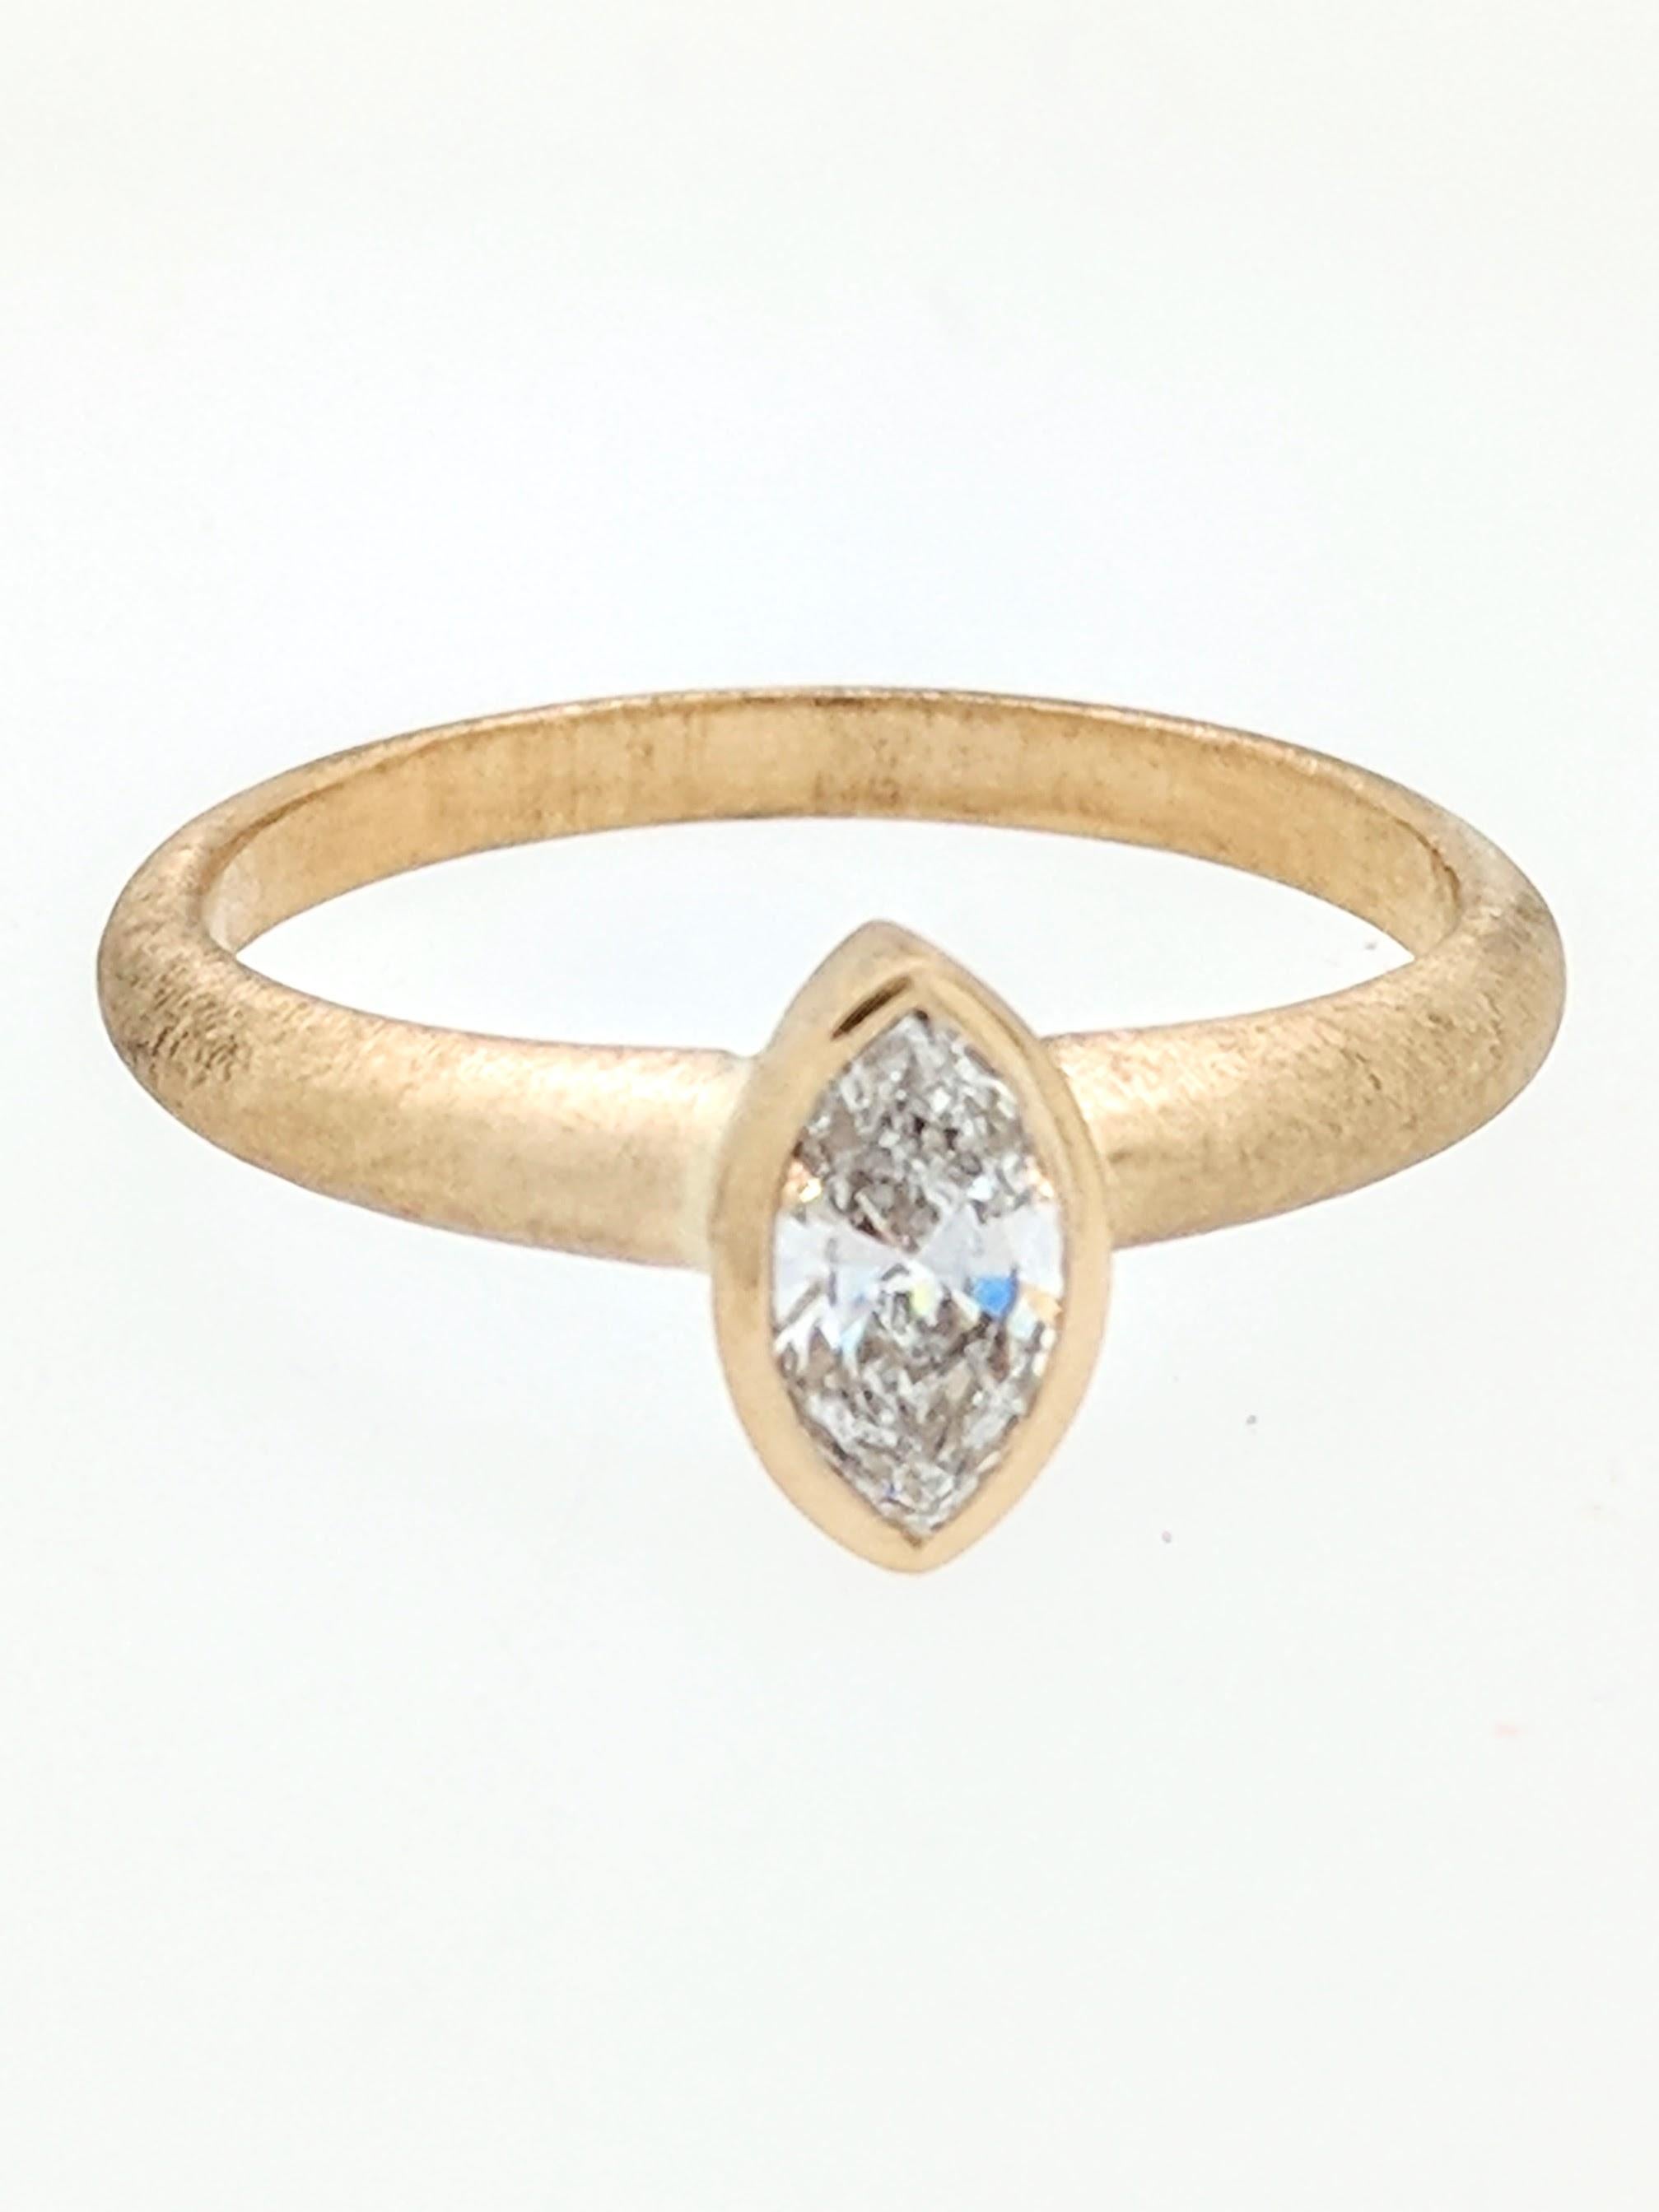 You are viewing a stunning .56ct. natural marquise cut diamond. We estimate this diamond to be SI1 in clarity and G-H color. The diamond is beautifully displayed in a brand new custom made 14kyg bezel set solitaire setting with a matte brushed